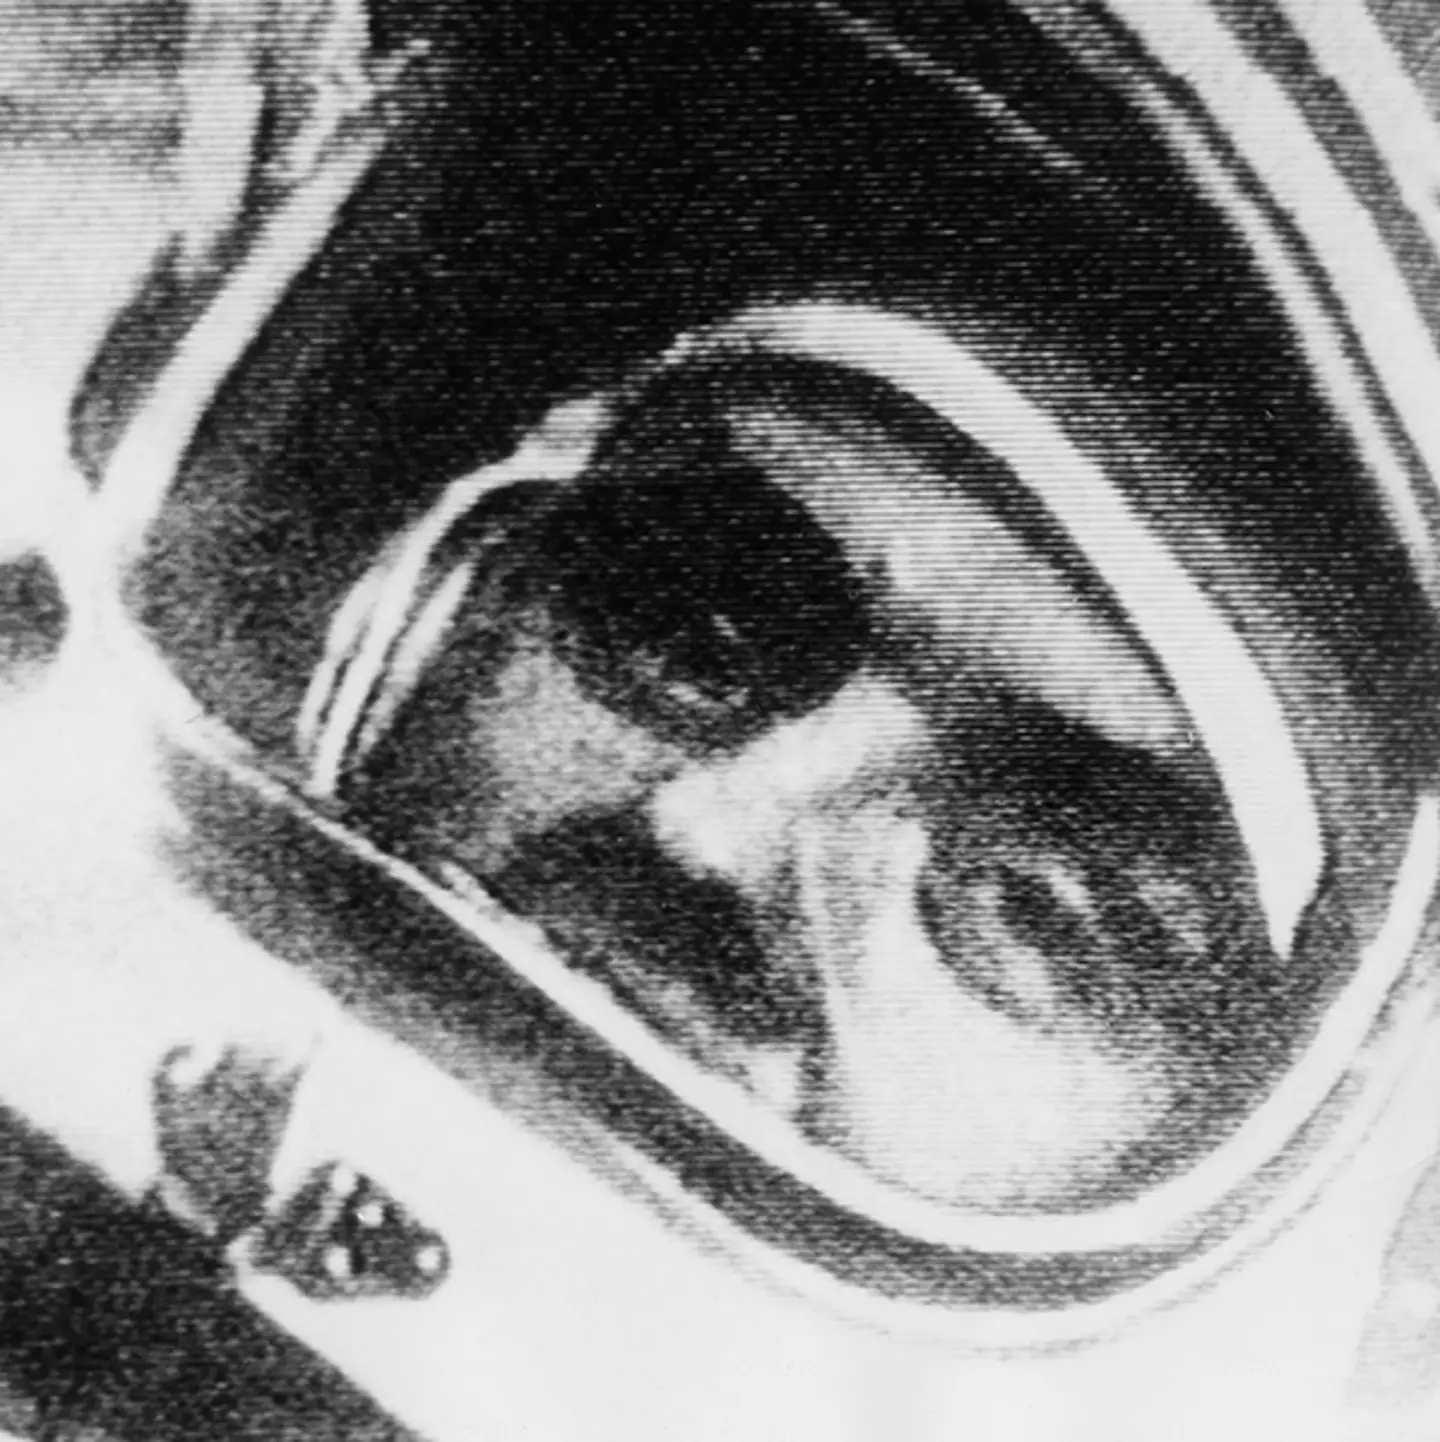 Chilling last words of cosmonaut heard in final transmission as he fell from space